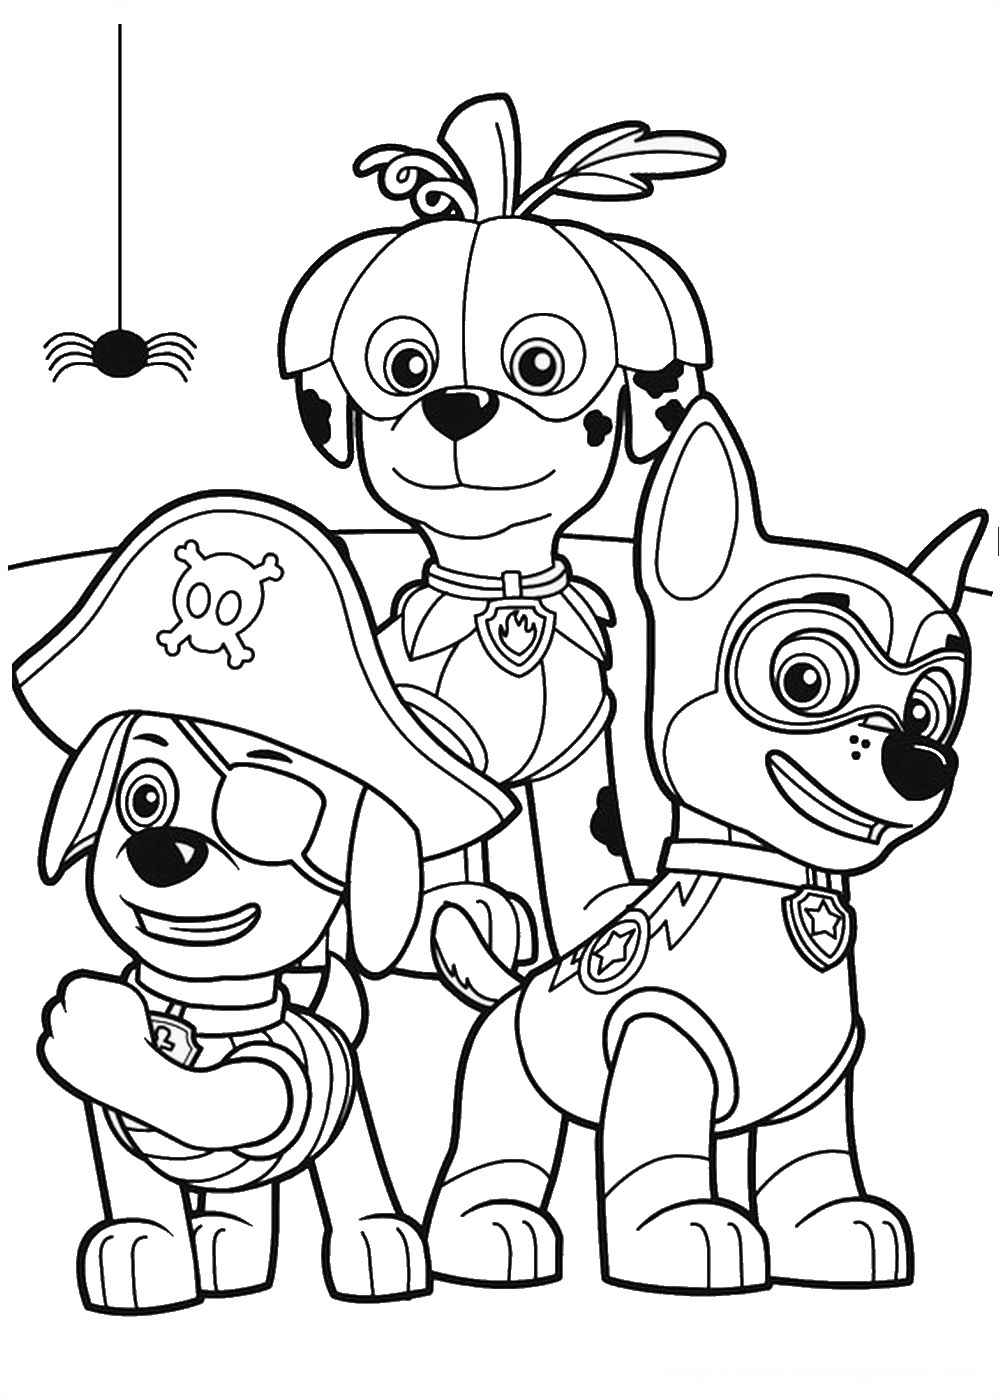 Drawing Paw Patrol #44340 (Cartoons) – Printable coloring pages